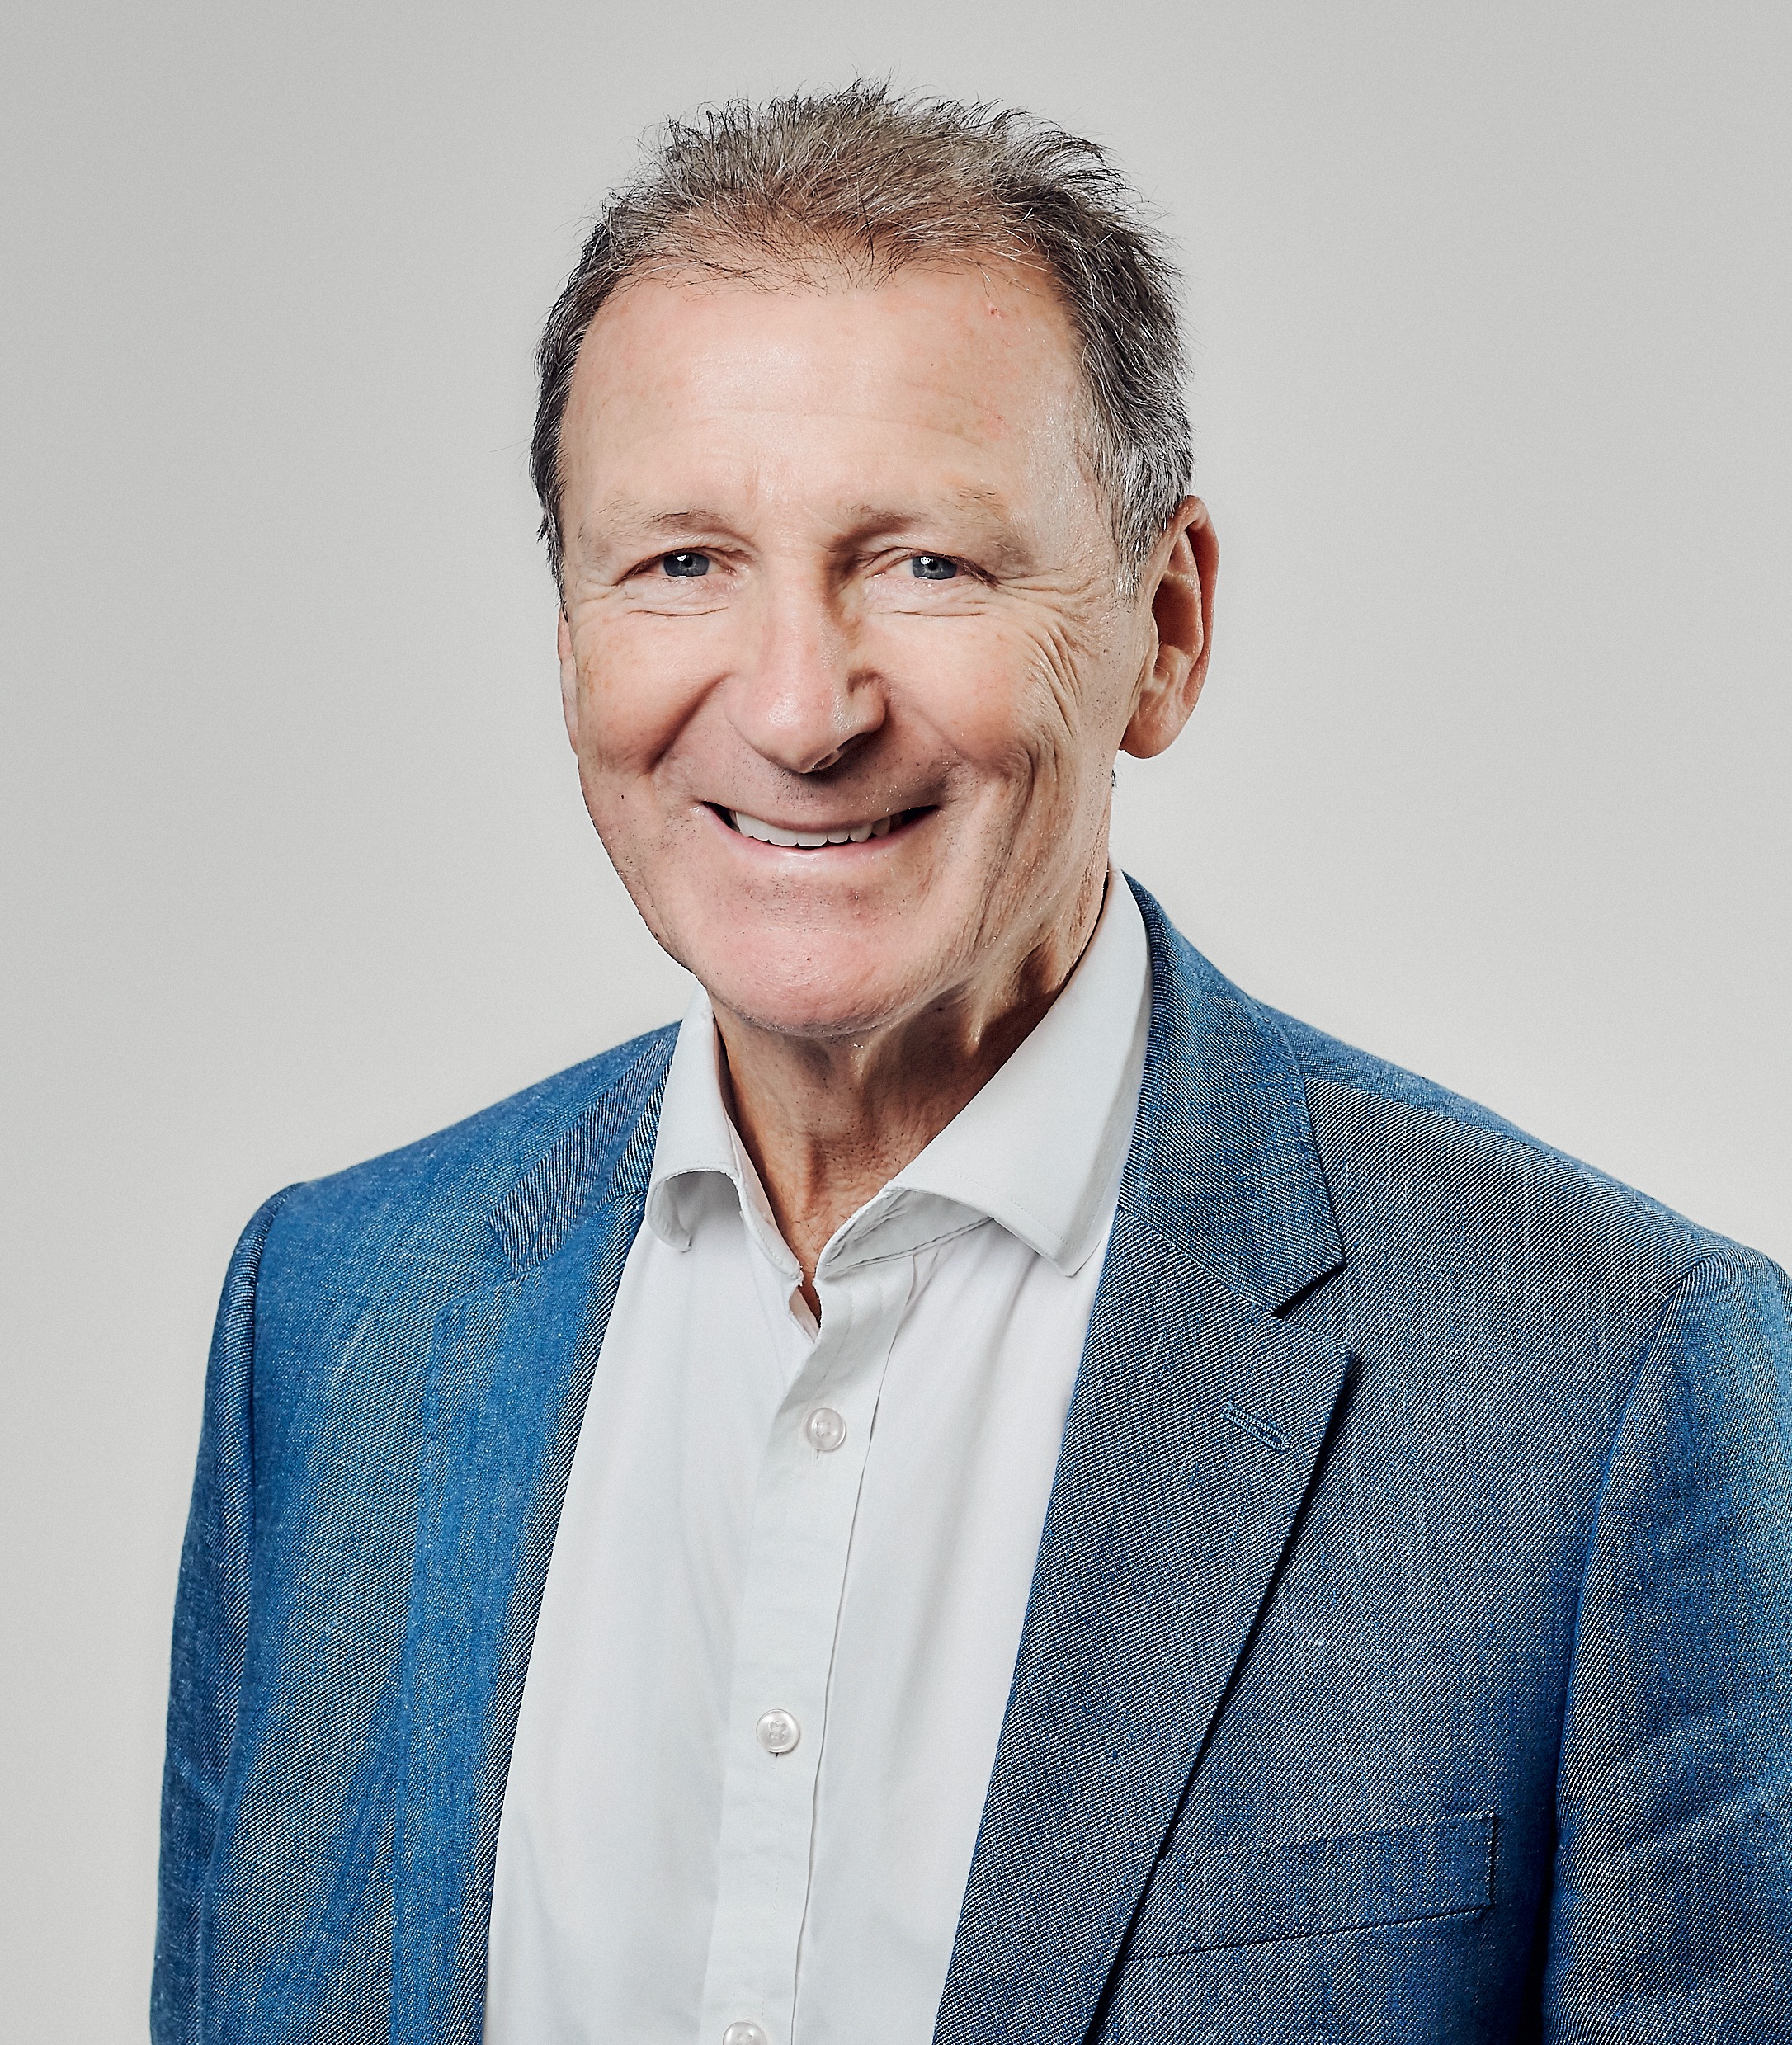 Lord Gus O'Donnell